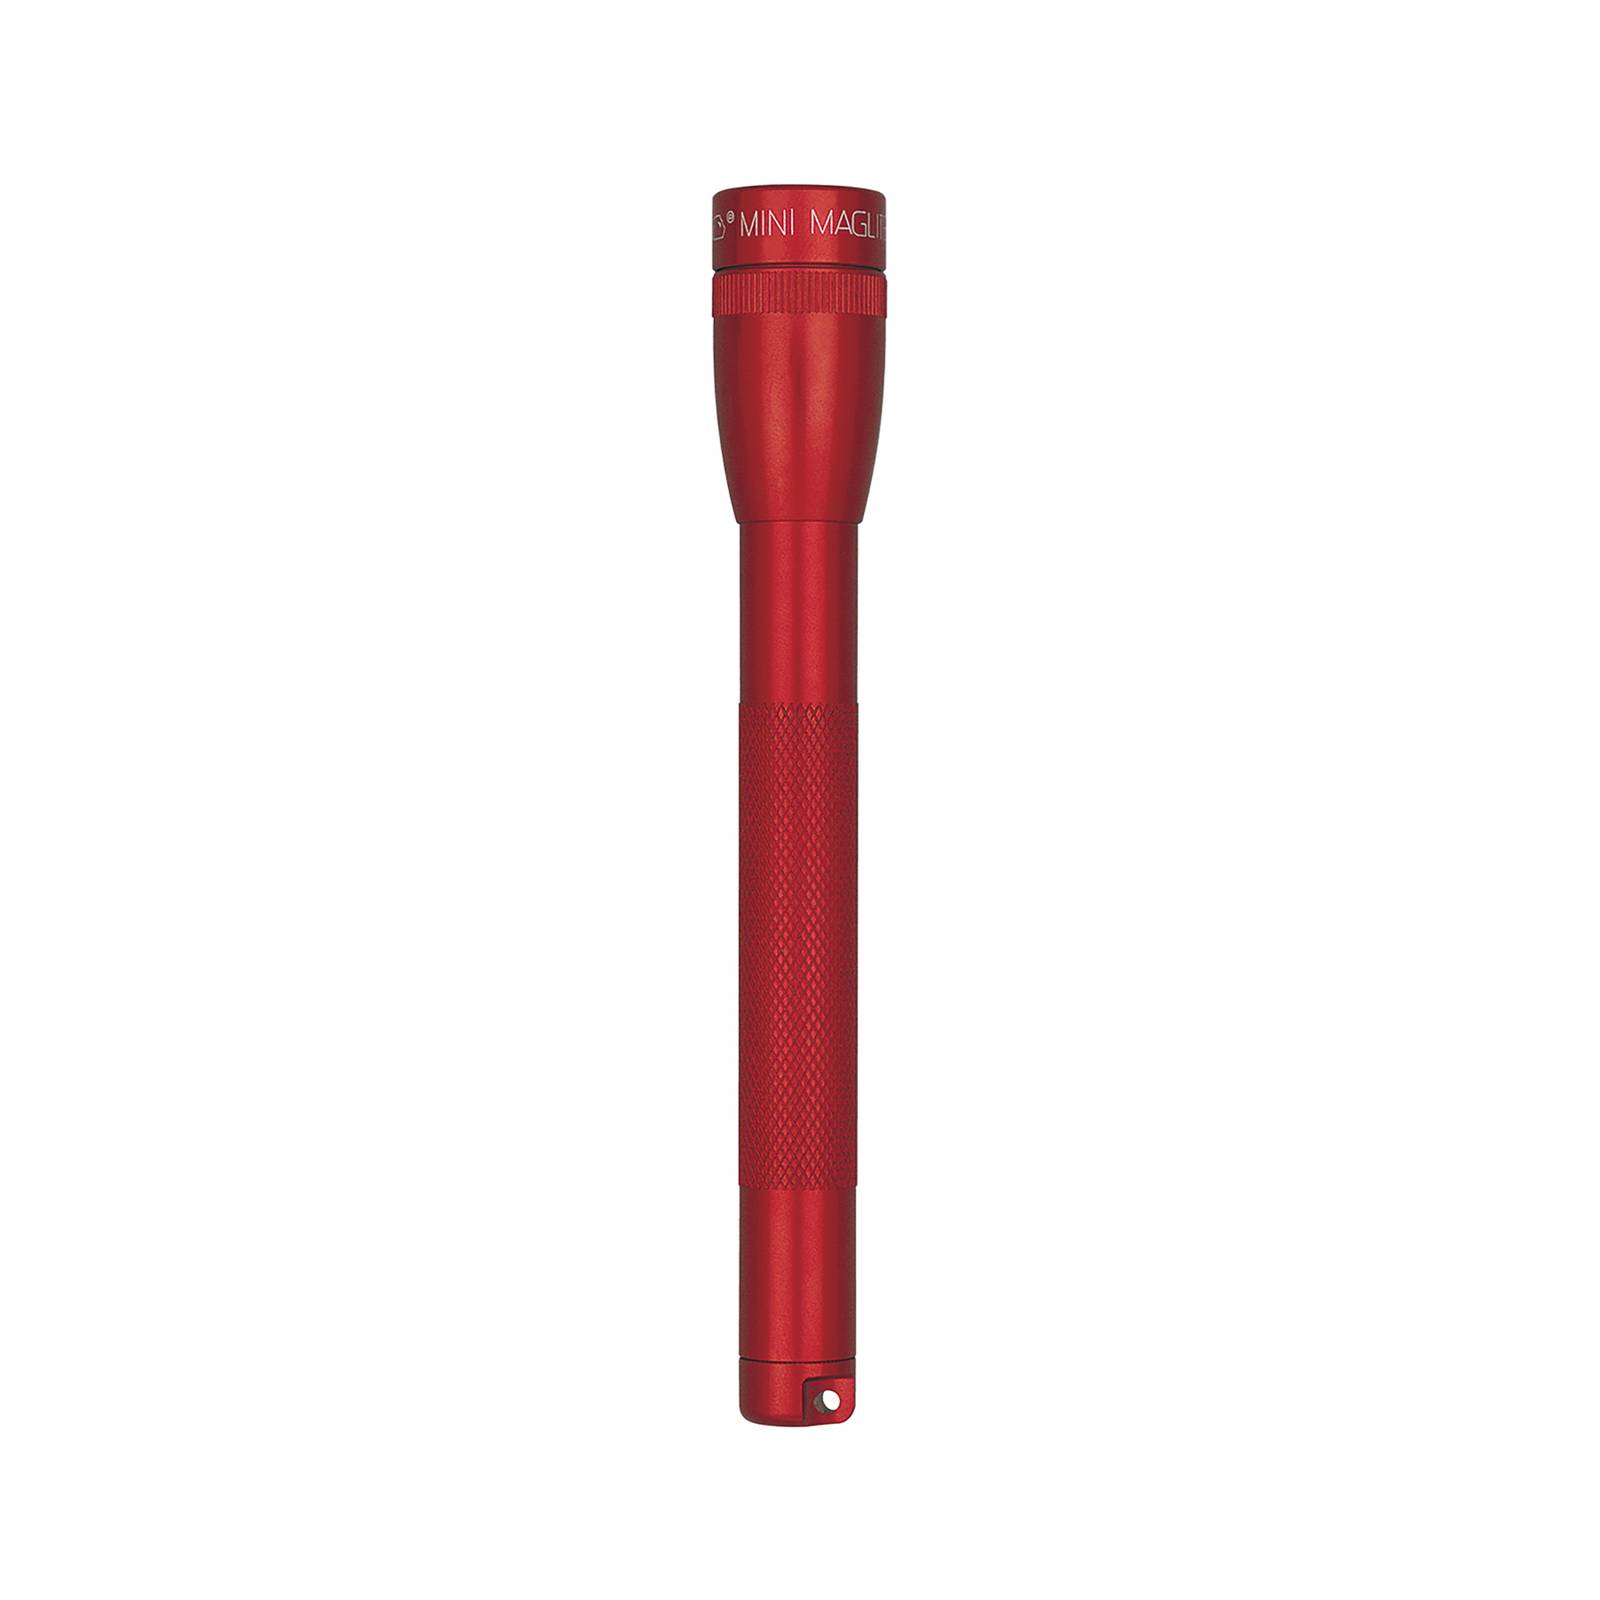 Torcia Maglite Mini, 2 Cell AAA, rosso